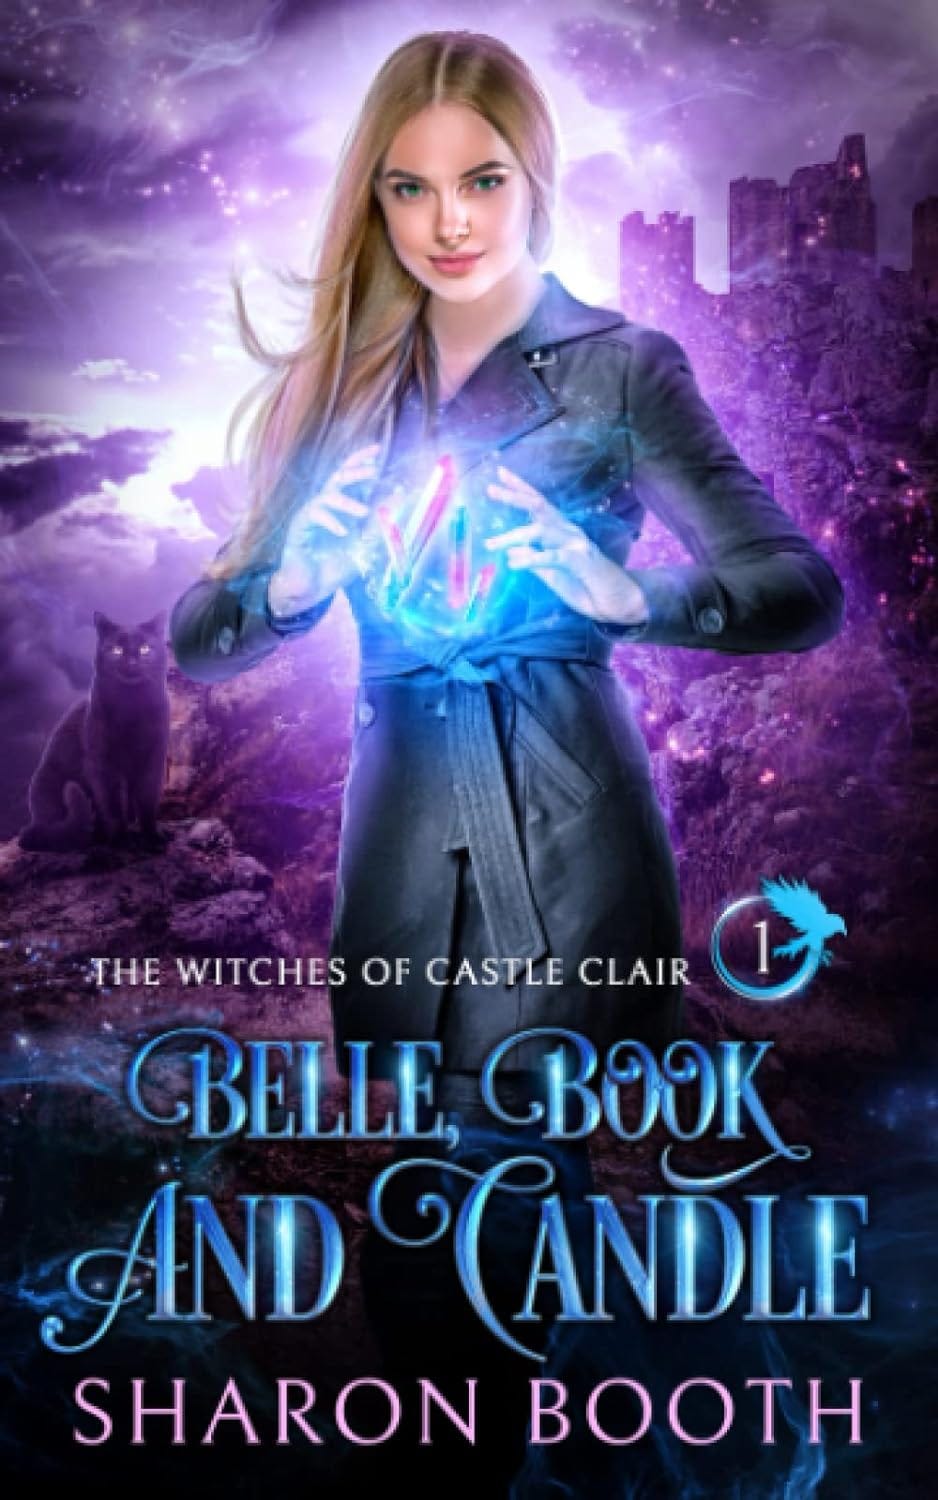 Book cover of Belle, Book and Candle by Sharon Booth showing a blonde woman with sparkly crystals floating between her hands with a castle in the background